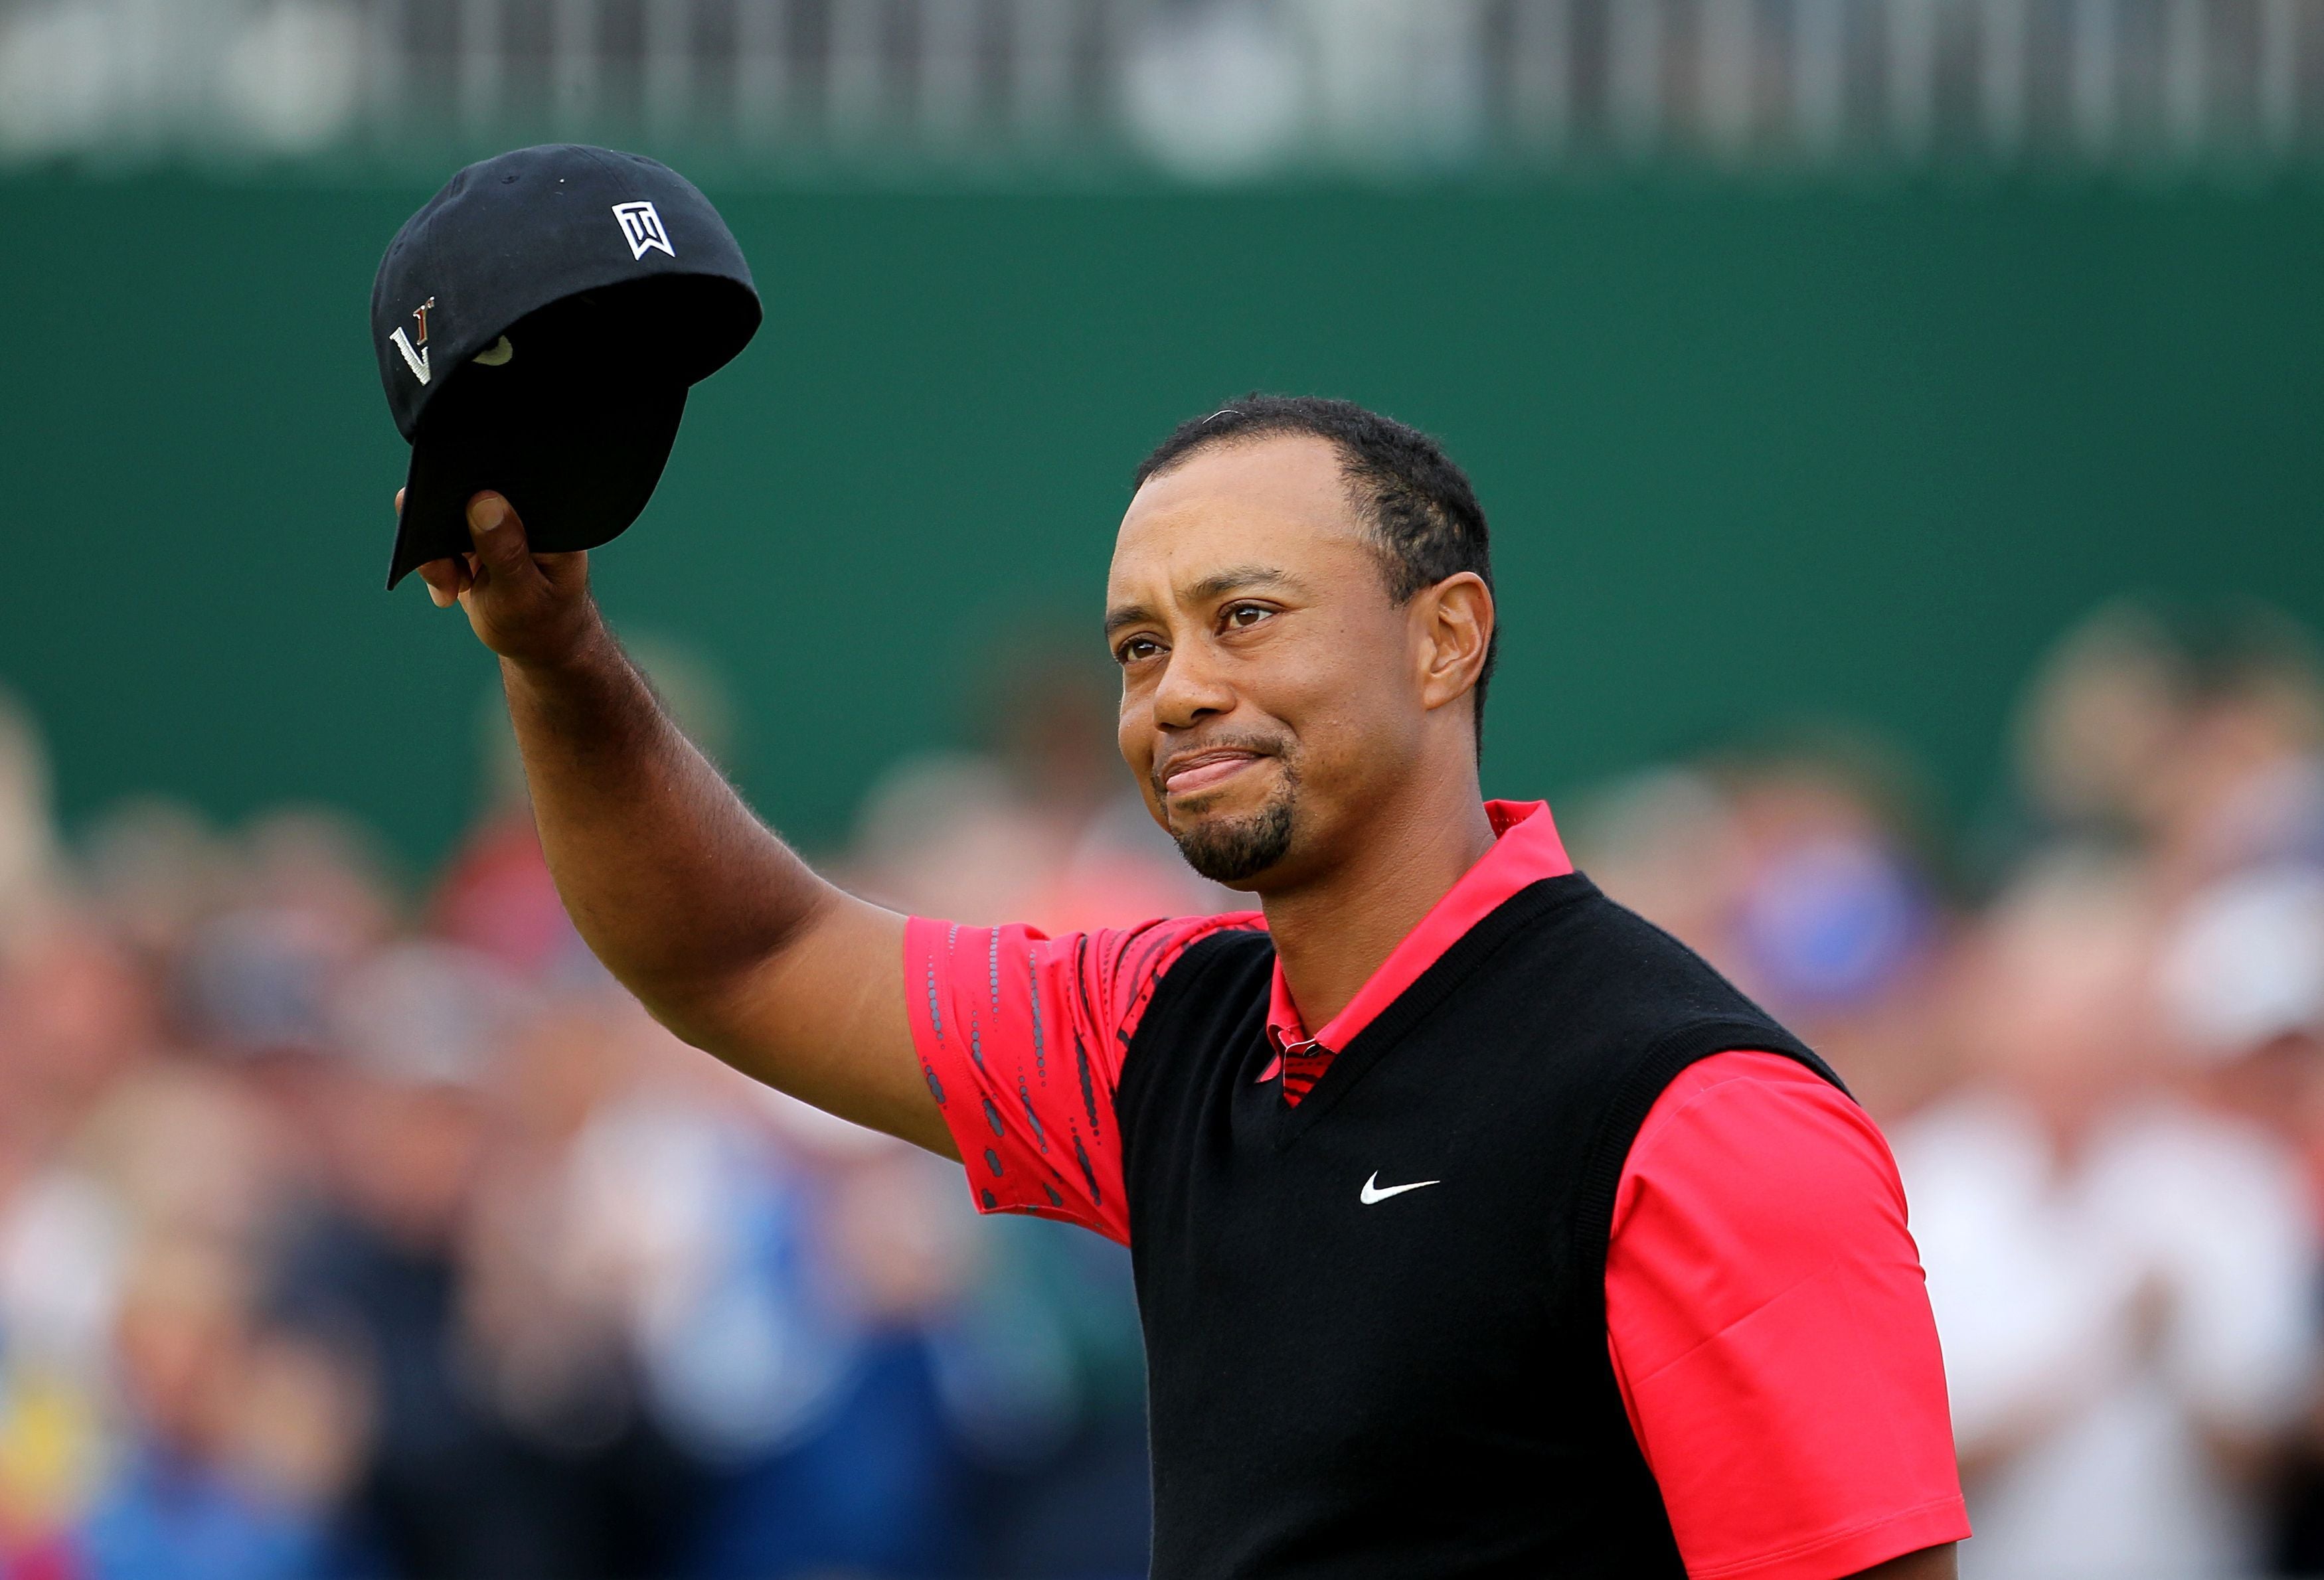 Tiger Woods is still undecided whether to compete at the Masters